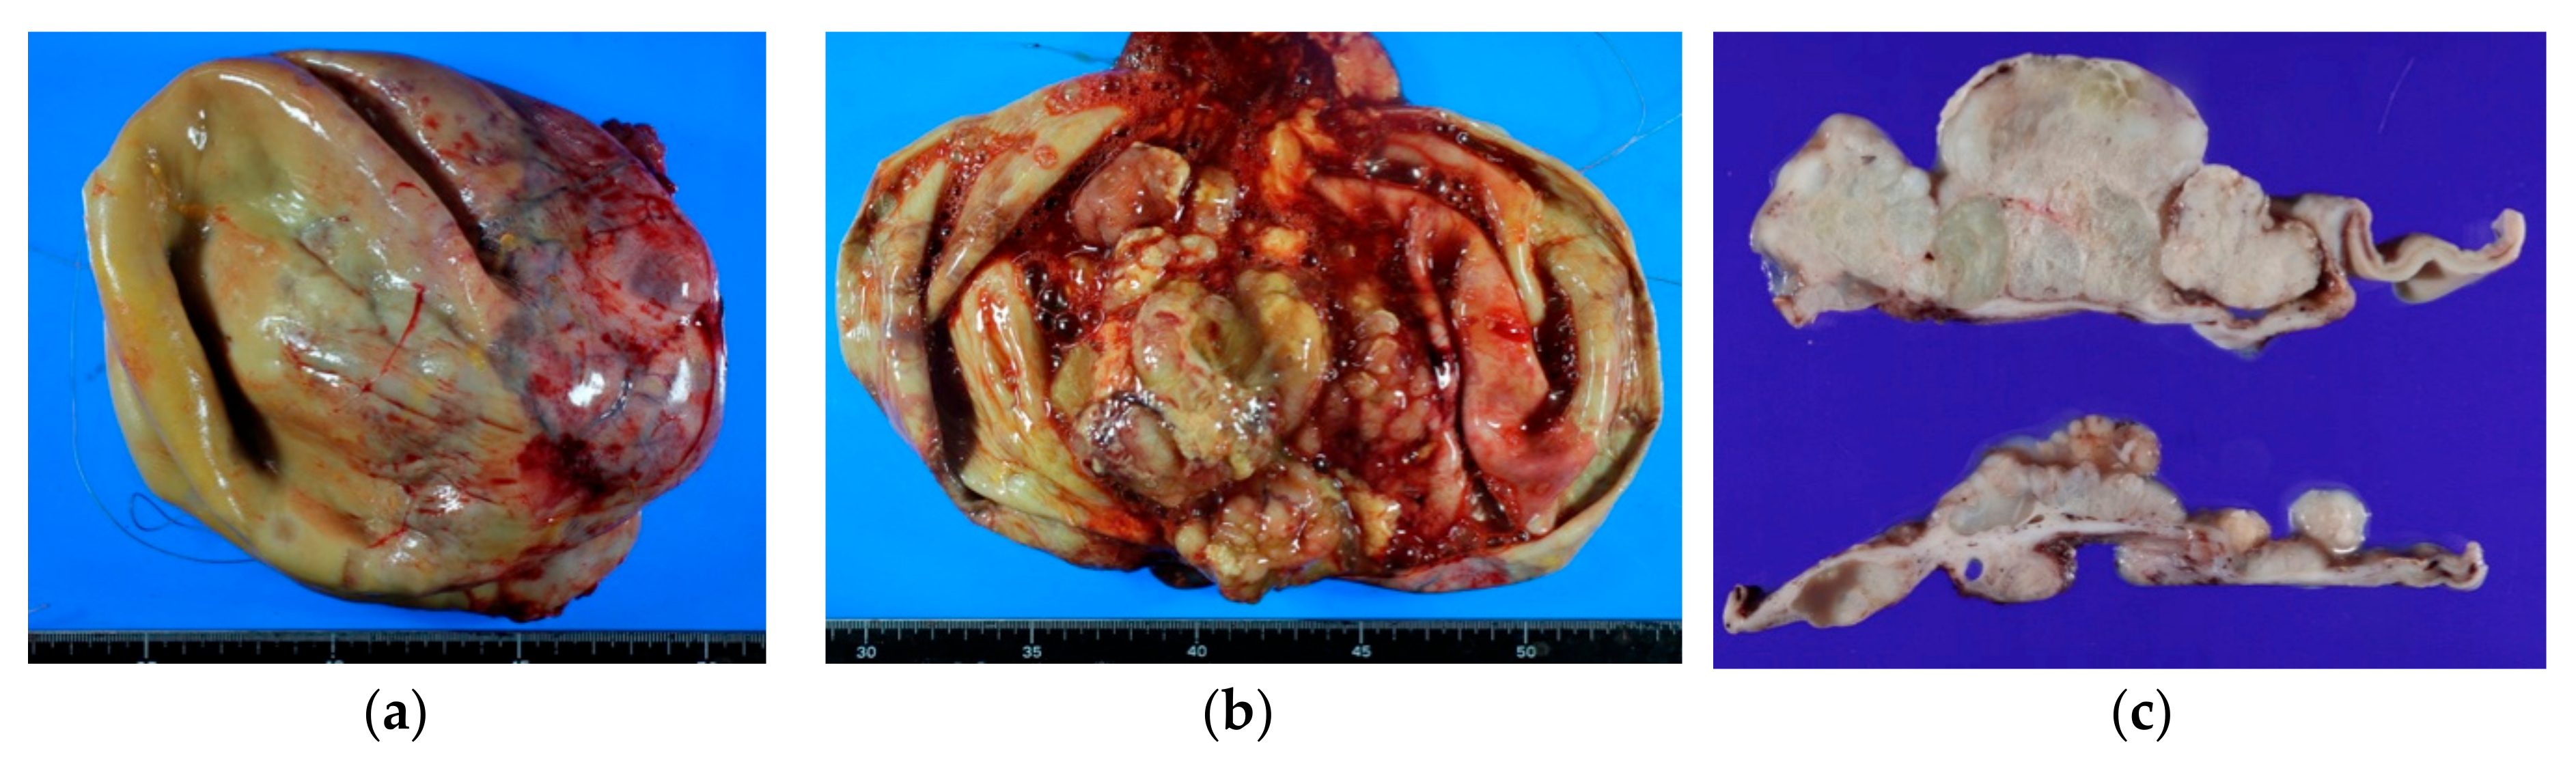 a Picture of an ovarian seromucinous borderline tumour. The